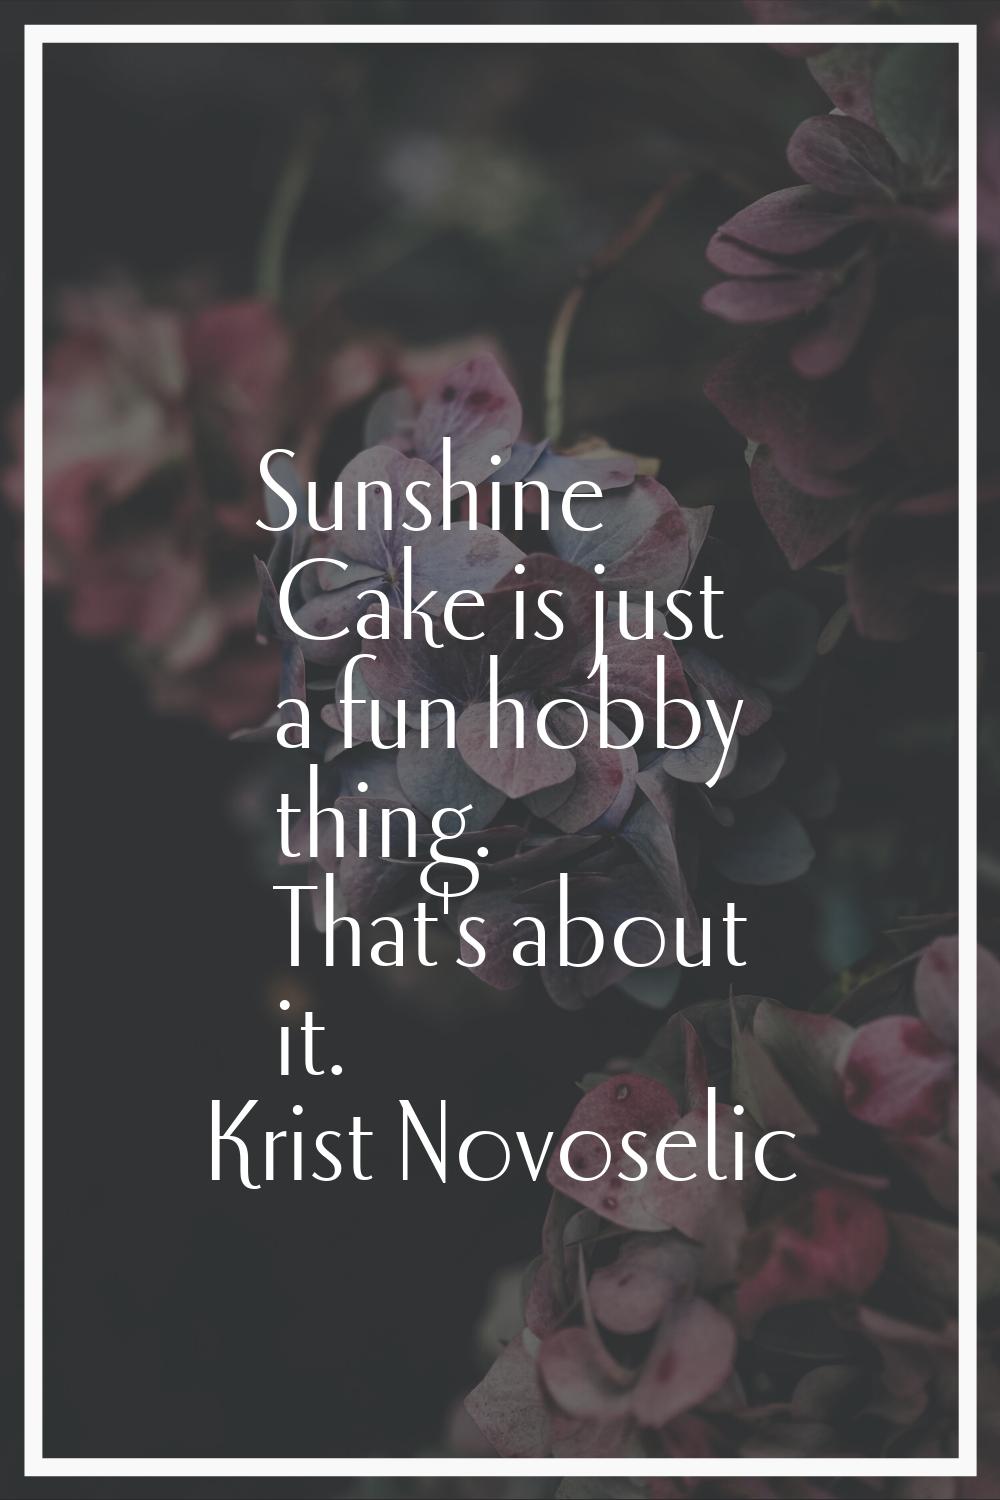 Sunshine Cake is just a fun hobby thing. That's about it.